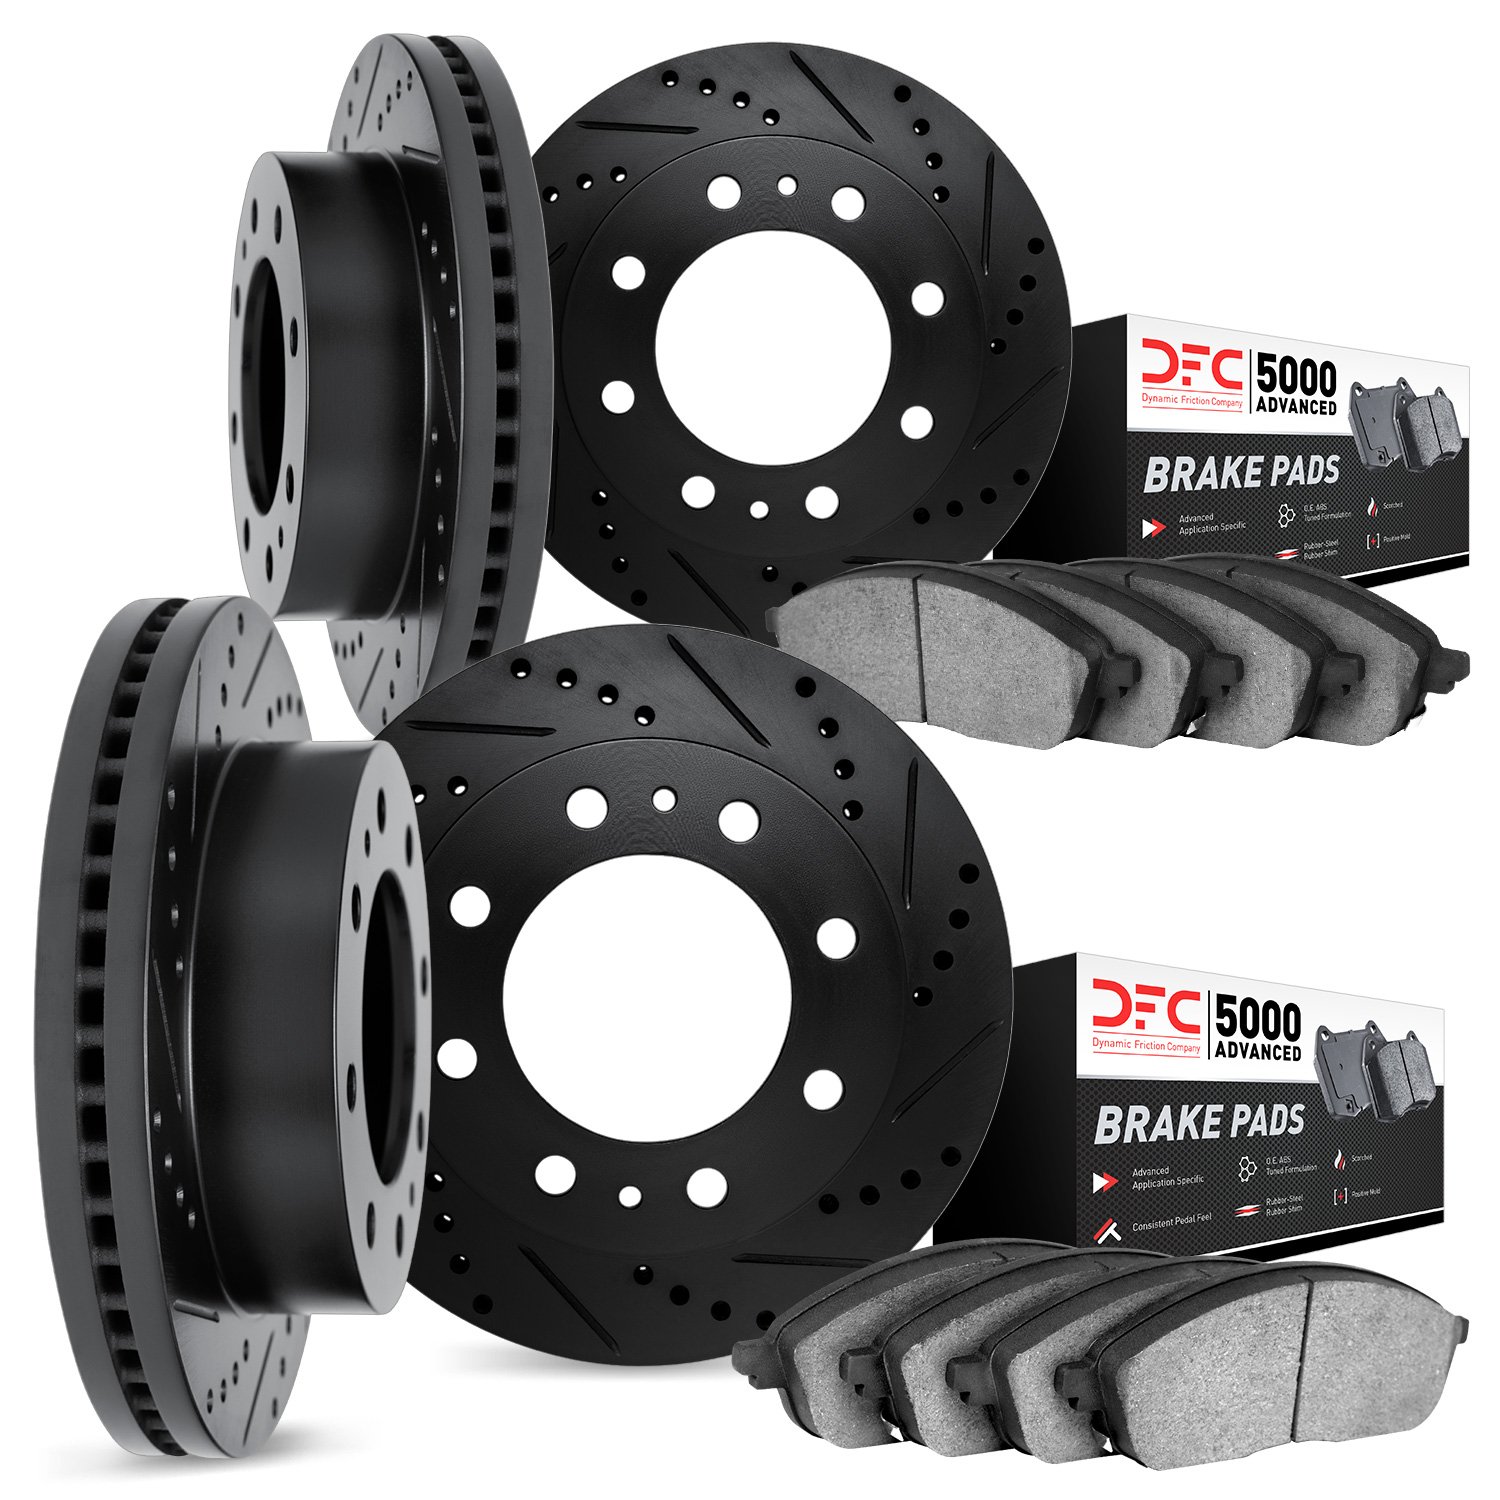 8504-48012 Drilled/Slotted Brake Rotors w/5000 Advanced Brake Pads Kit [Black], 2005-2005 GM, Position: Front and Rear